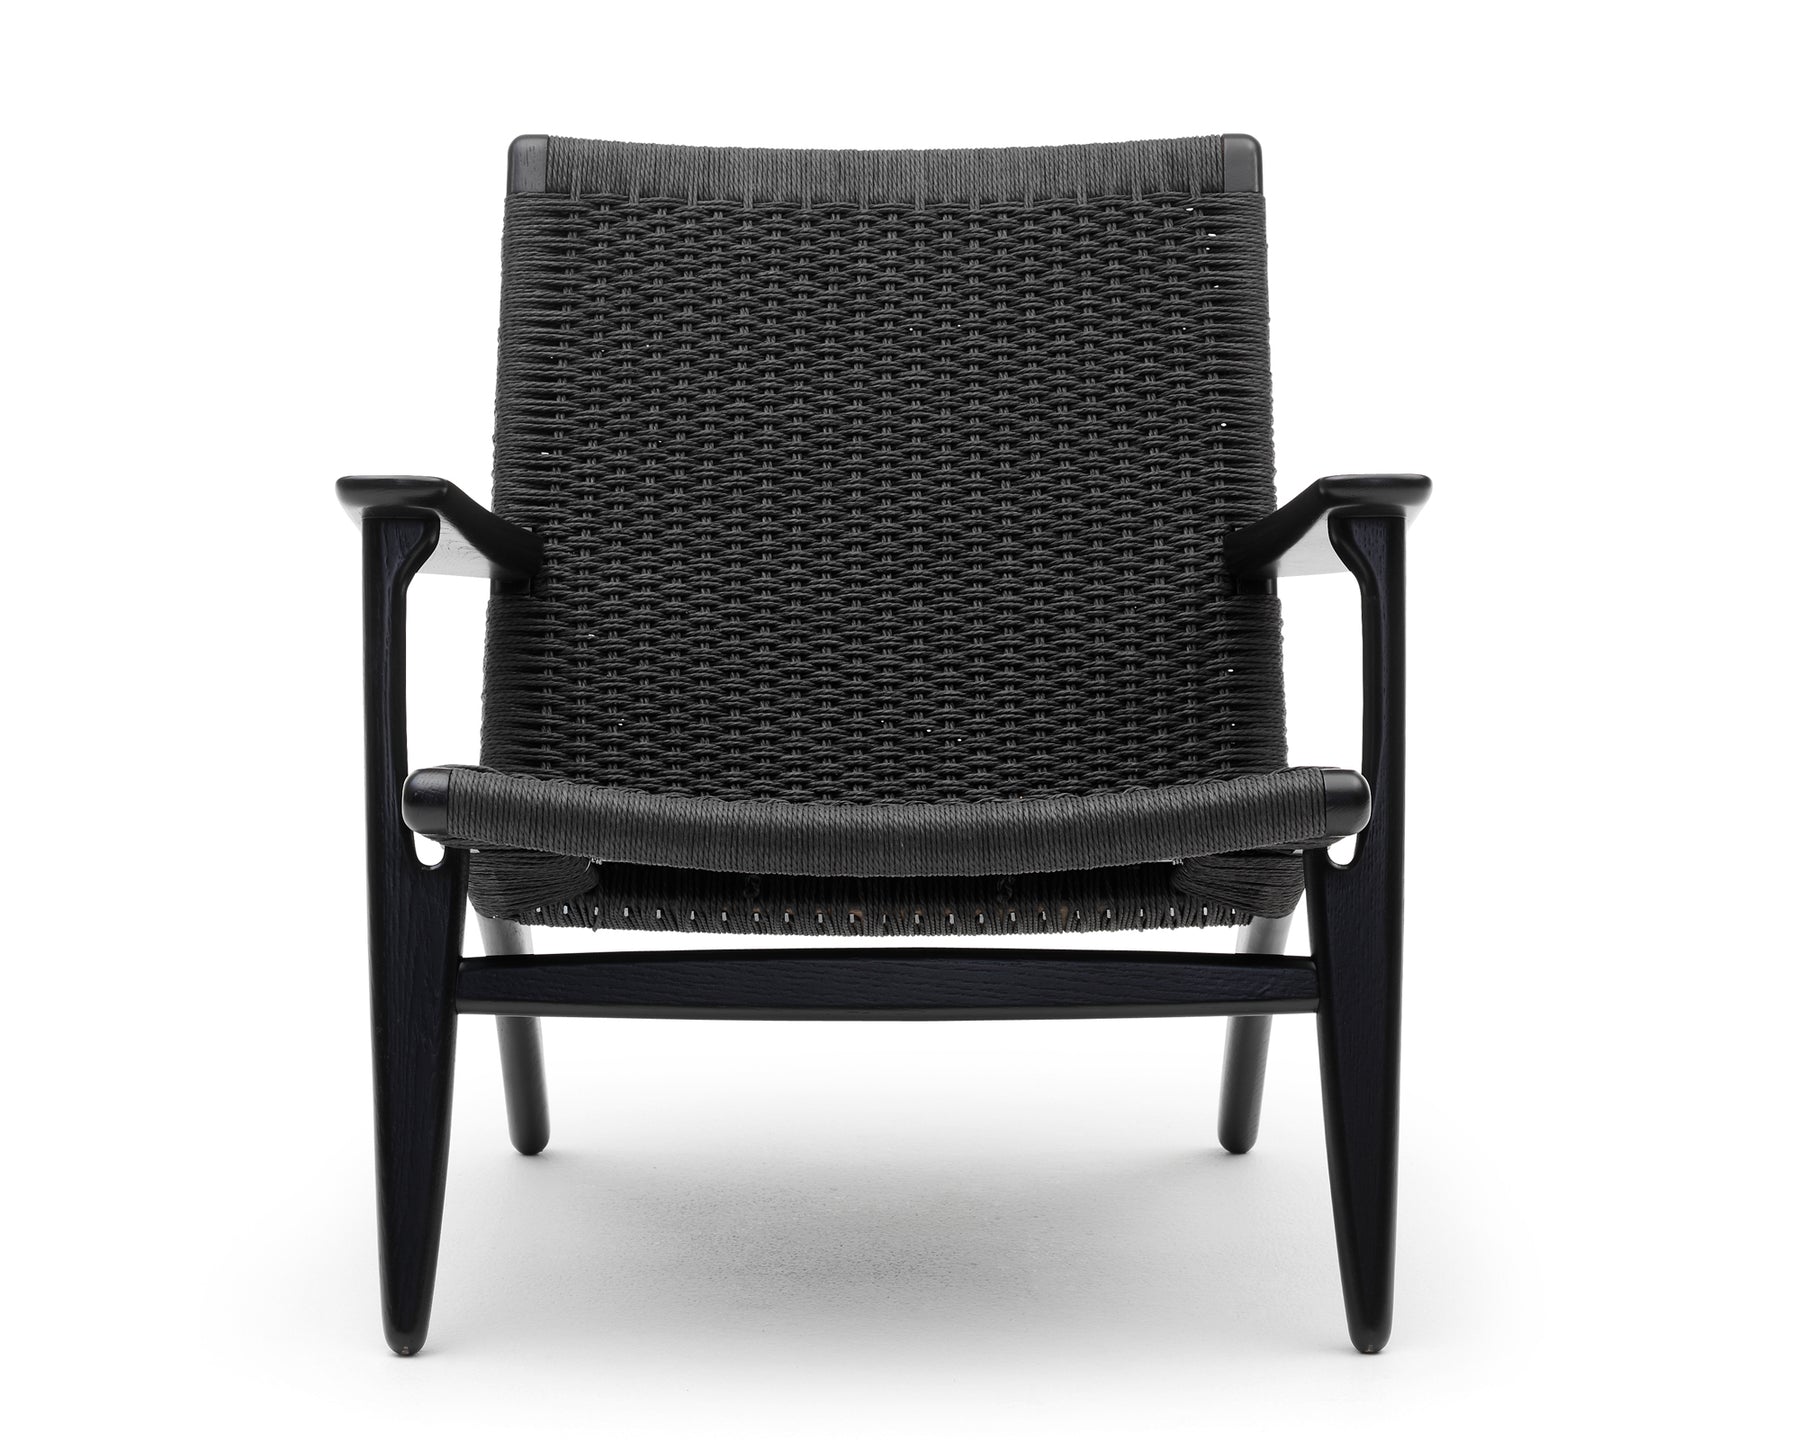 Low Lounge Chair | DSHOP